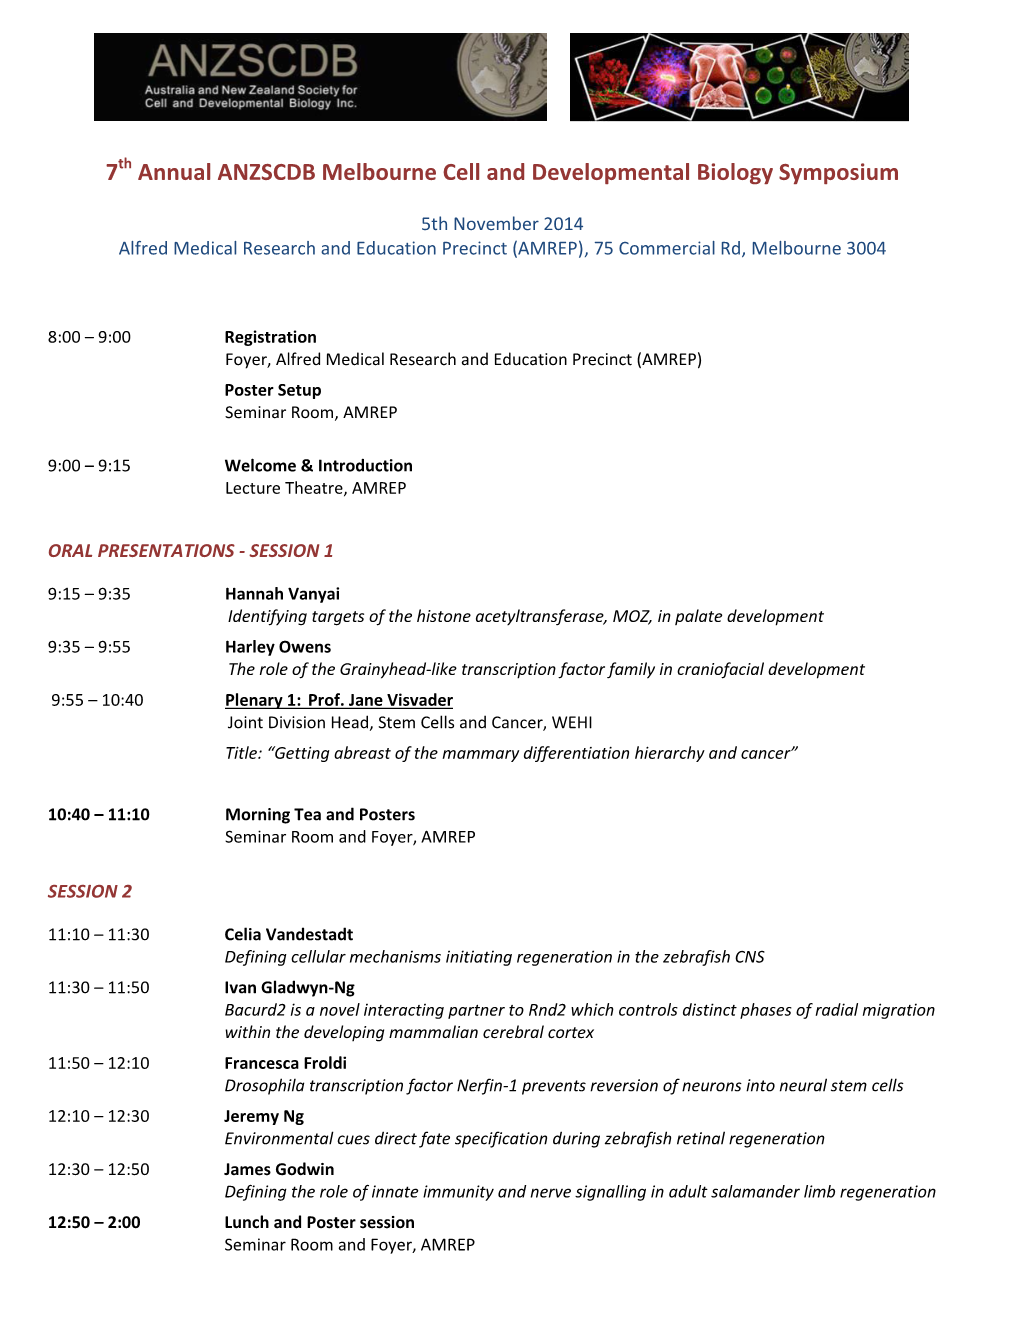 7 Annual ANZSCDB Melbourne Cell and Developmental Biology Symposium